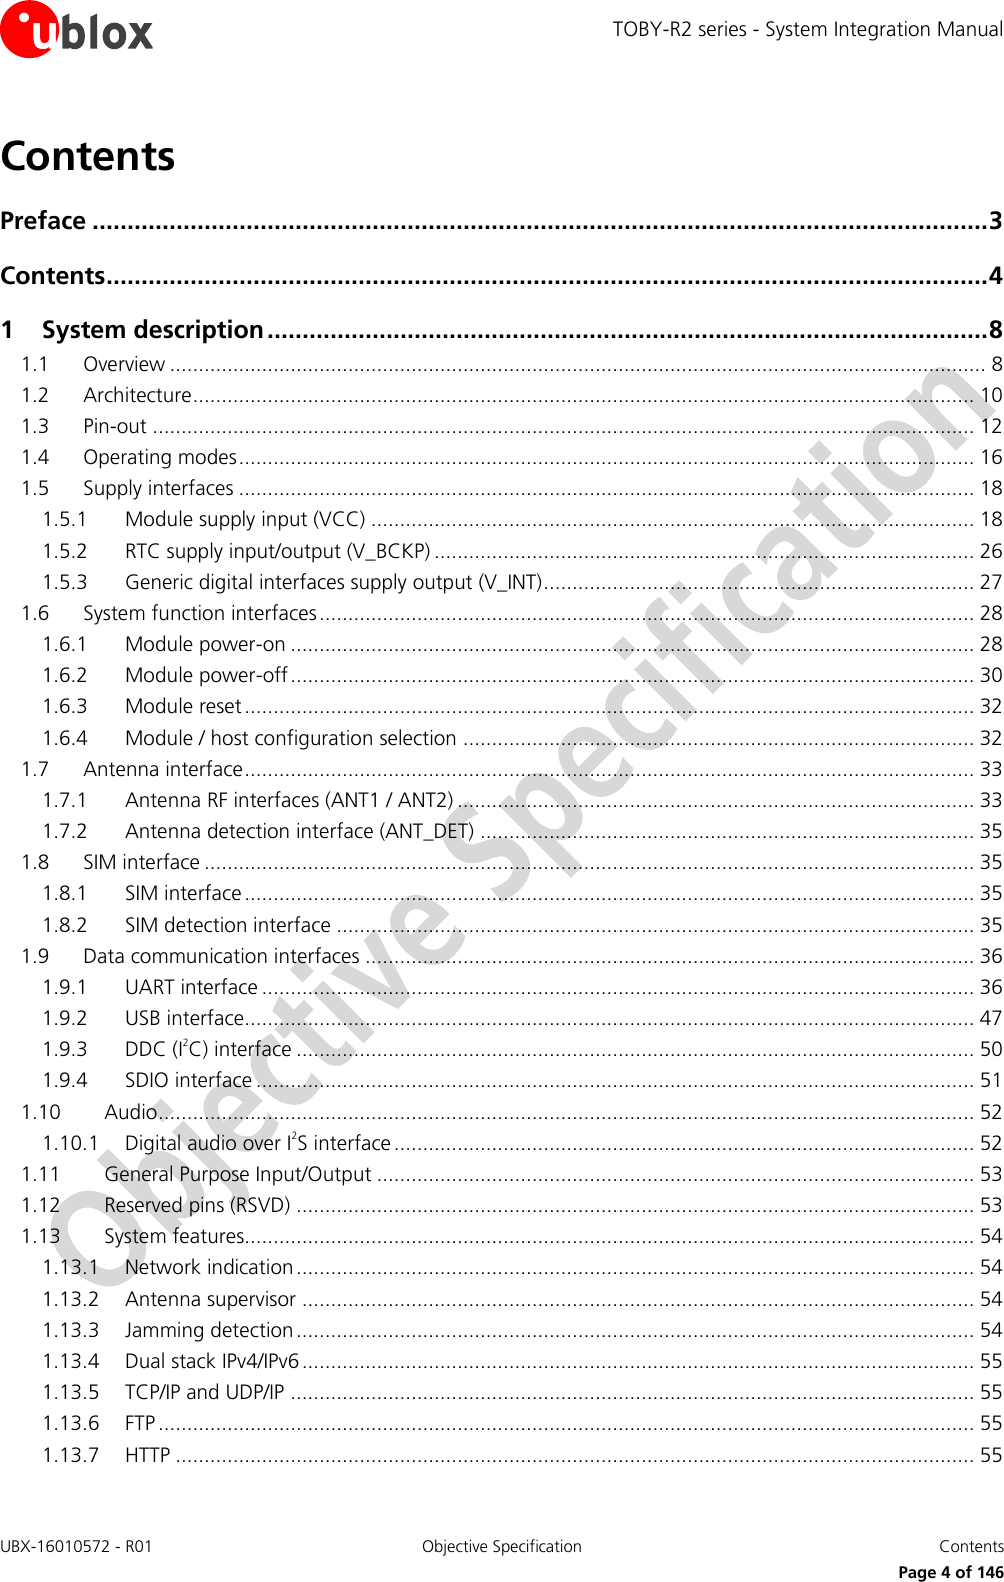 TOBY-R2 series - System Integration Manual UBX-16010572 - R01  Objective Specification  Contents     Page 4 of 146 Contents Preface ................................................................................................................................ 3 Contents .............................................................................................................................. 4 1 System description ....................................................................................................... 8 1.1 Overview .............................................................................................................................................. 8 1.2 Architecture ........................................................................................................................................ 10 1.3 Pin-out ............................................................................................................................................... 12 1.4 Operating modes ................................................................................................................................ 16 1.5 Supply interfaces ................................................................................................................................ 18 1.5.1 Module supply input (VCC) ......................................................................................................... 18 1.5.2 RTC supply input/output (V_BCKP) .............................................................................................. 26 1.5.3 Generic digital interfaces supply output (V_INT) ........................................................................... 27 1.6 System function interfaces .................................................................................................................. 28 1.6.1 Module power-on ....................................................................................................................... 28 1.6.2 Module power-off ....................................................................................................................... 30 1.6.3 Module reset ............................................................................................................................... 32 1.6.4 Module / host configuration selection ......................................................................................... 32 1.7 Antenna interface ............................................................................................................................... 33 1.7.1 Antenna RF interfaces (ANT1 / ANT2) .......................................................................................... 33 1.7.2 Antenna detection interface (ANT_DET) ...................................................................................... 35 1.8 SIM interface ...................................................................................................................................... 35 1.8.1 SIM interface ............................................................................................................................... 35 1.8.2 SIM detection interface ............................................................................................................... 35 1.9 Data communication interfaces .......................................................................................................... 36 1.9.1 UART interface ............................................................................................................................ 36 1.9.2 USB interface............................................................................................................................... 47 1.9.3 DDC (I2C) interface ...................................................................................................................... 50 1.9.4 SDIO interface ............................................................................................................................. 51 1.10 Audio .............................................................................................................................................. 52 1.10.1 Digital audio over I2S interface ..................................................................................................... 52 1.11 General Purpose Input/Output ........................................................................................................ 53 1.12 Reserved pins (RSVD) ...................................................................................................................... 53 1.13 System features............................................................................................................................... 54 1.13.1 Network indication ...................................................................................................................... 54 1.13.2 Antenna supervisor ..................................................................................................................... 54 1.13.3 Jamming detection ...................................................................................................................... 54 1.13.4 Dual stack IPv4/IPv6 ..................................................................................................................... 55 1.13.5 TCP/IP and UDP/IP ....................................................................................................................... 55 1.13.6 FTP .............................................................................................................................................. 55 1.13.7 HTTP ........................................................................................................................................... 55 